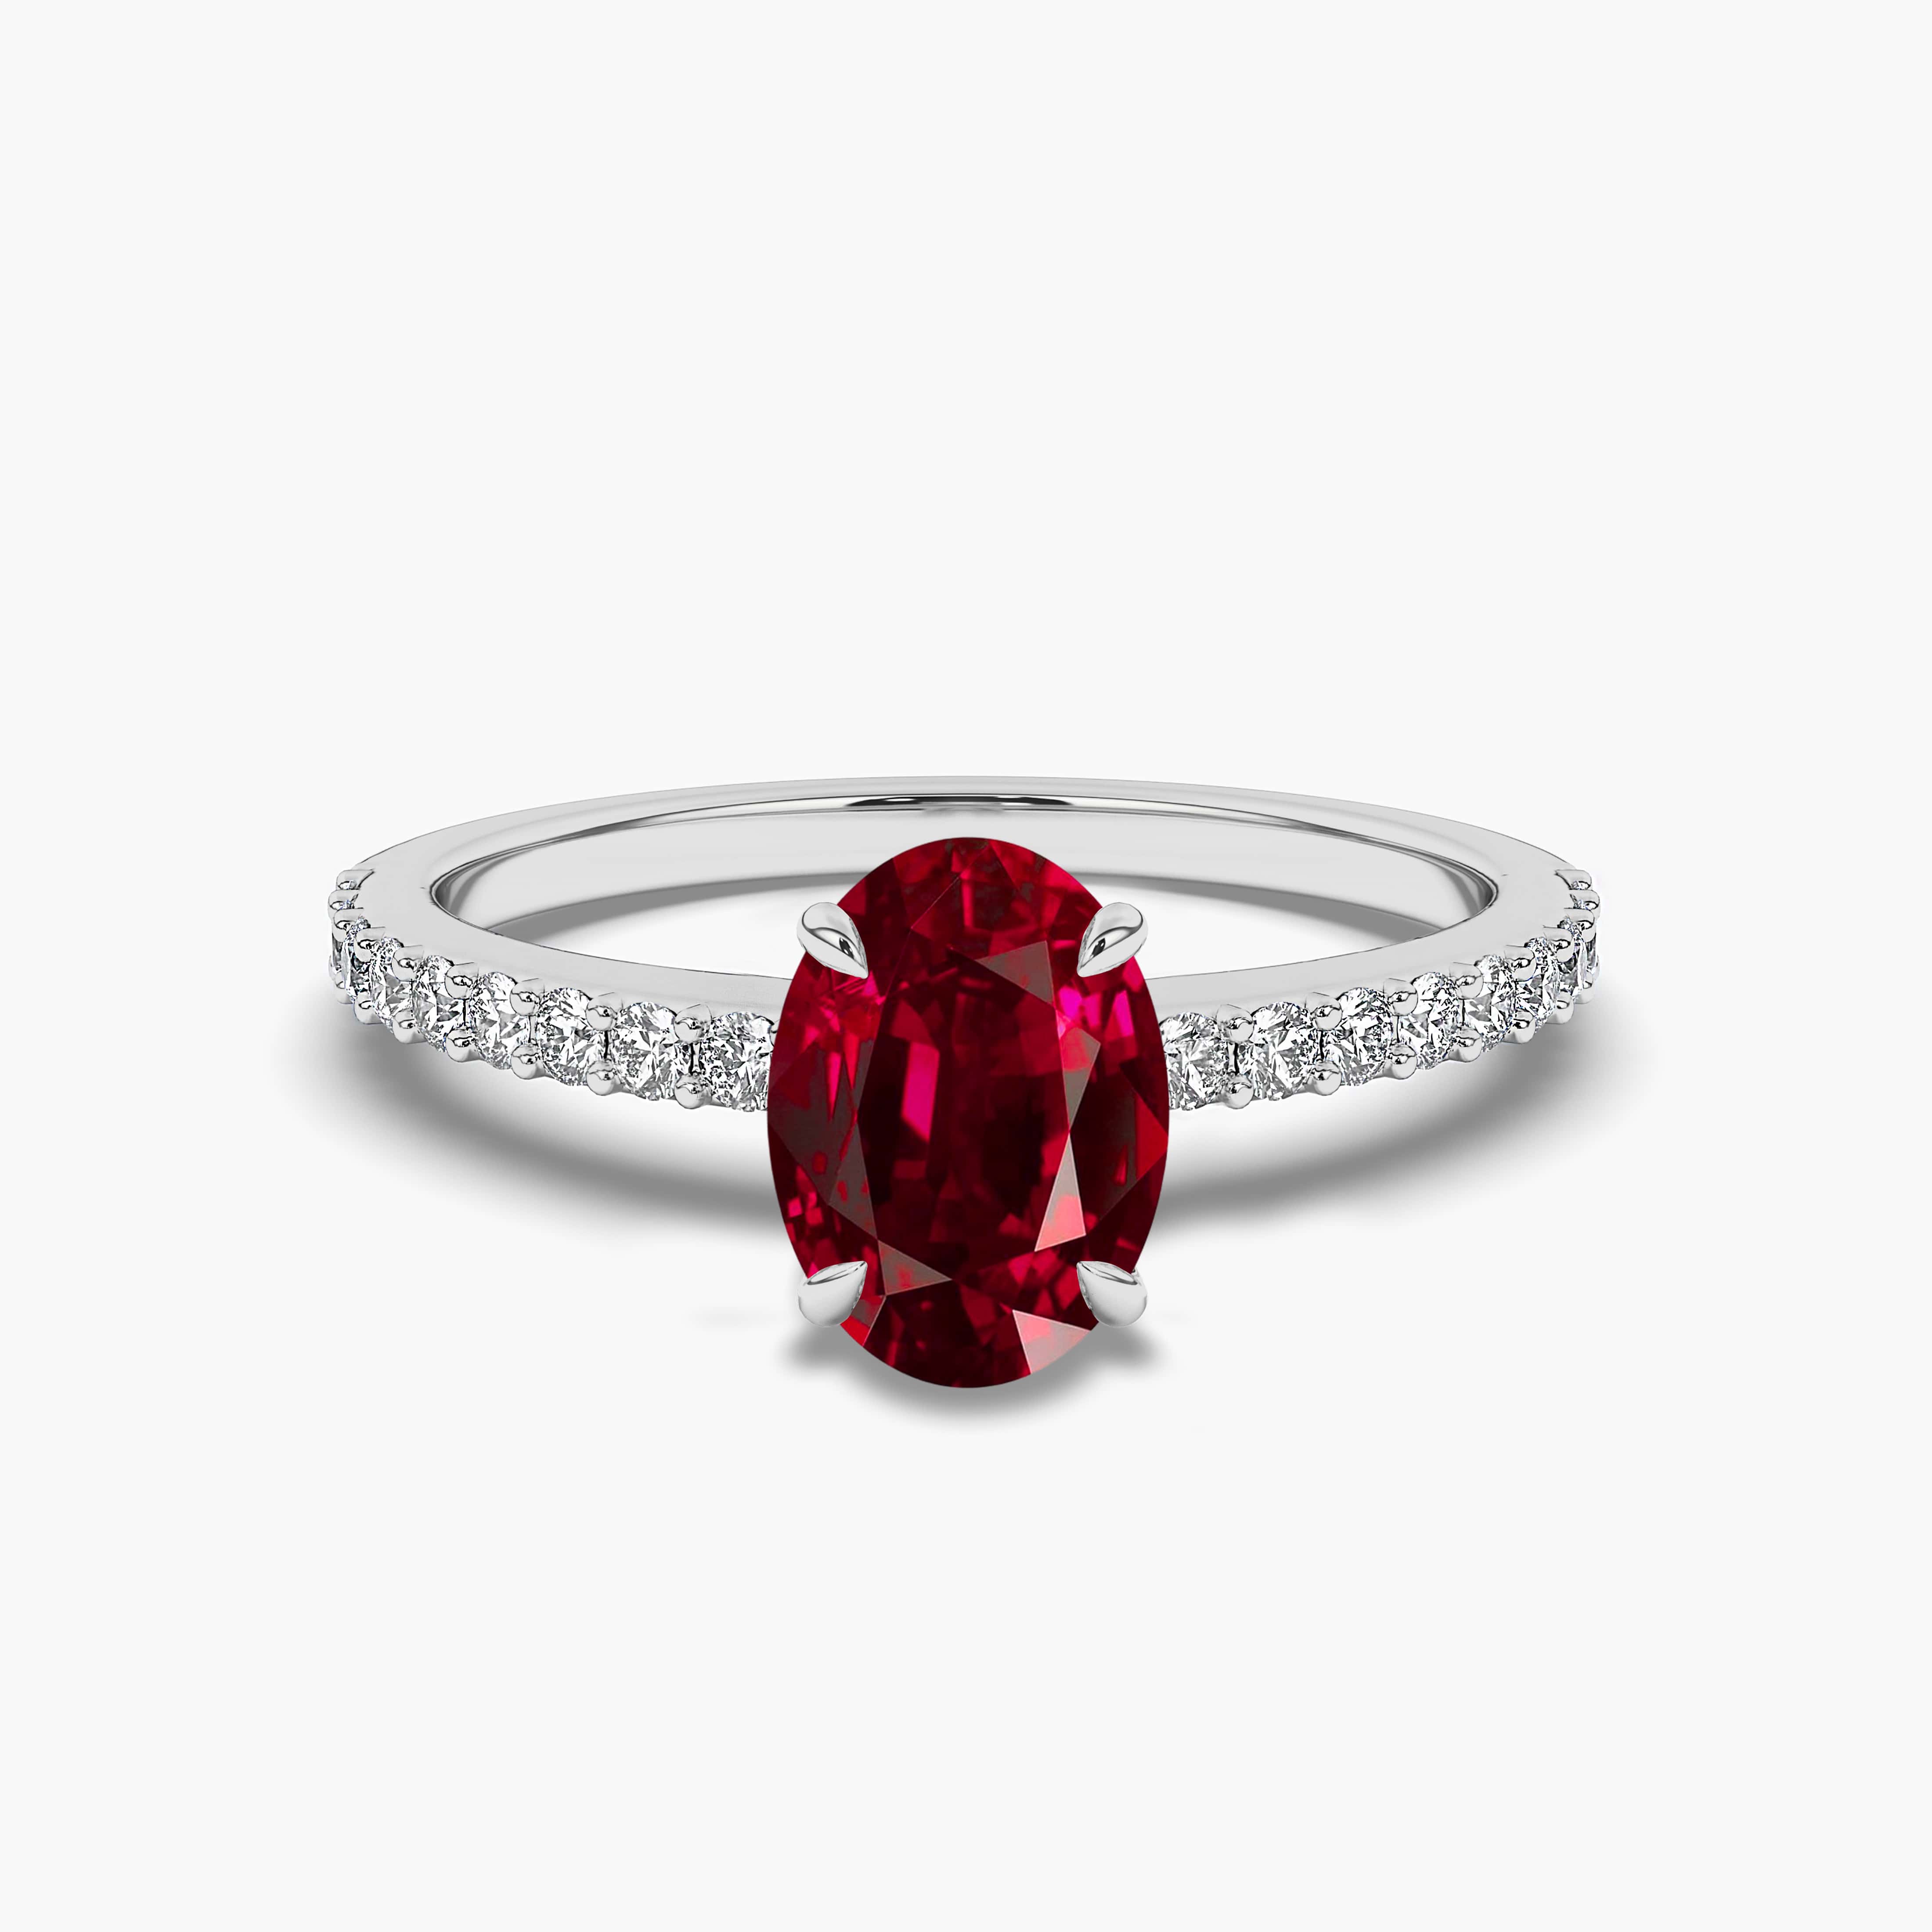  Oval Cut Diamond Engagement Ring With Ruby Side Stones In White Gold